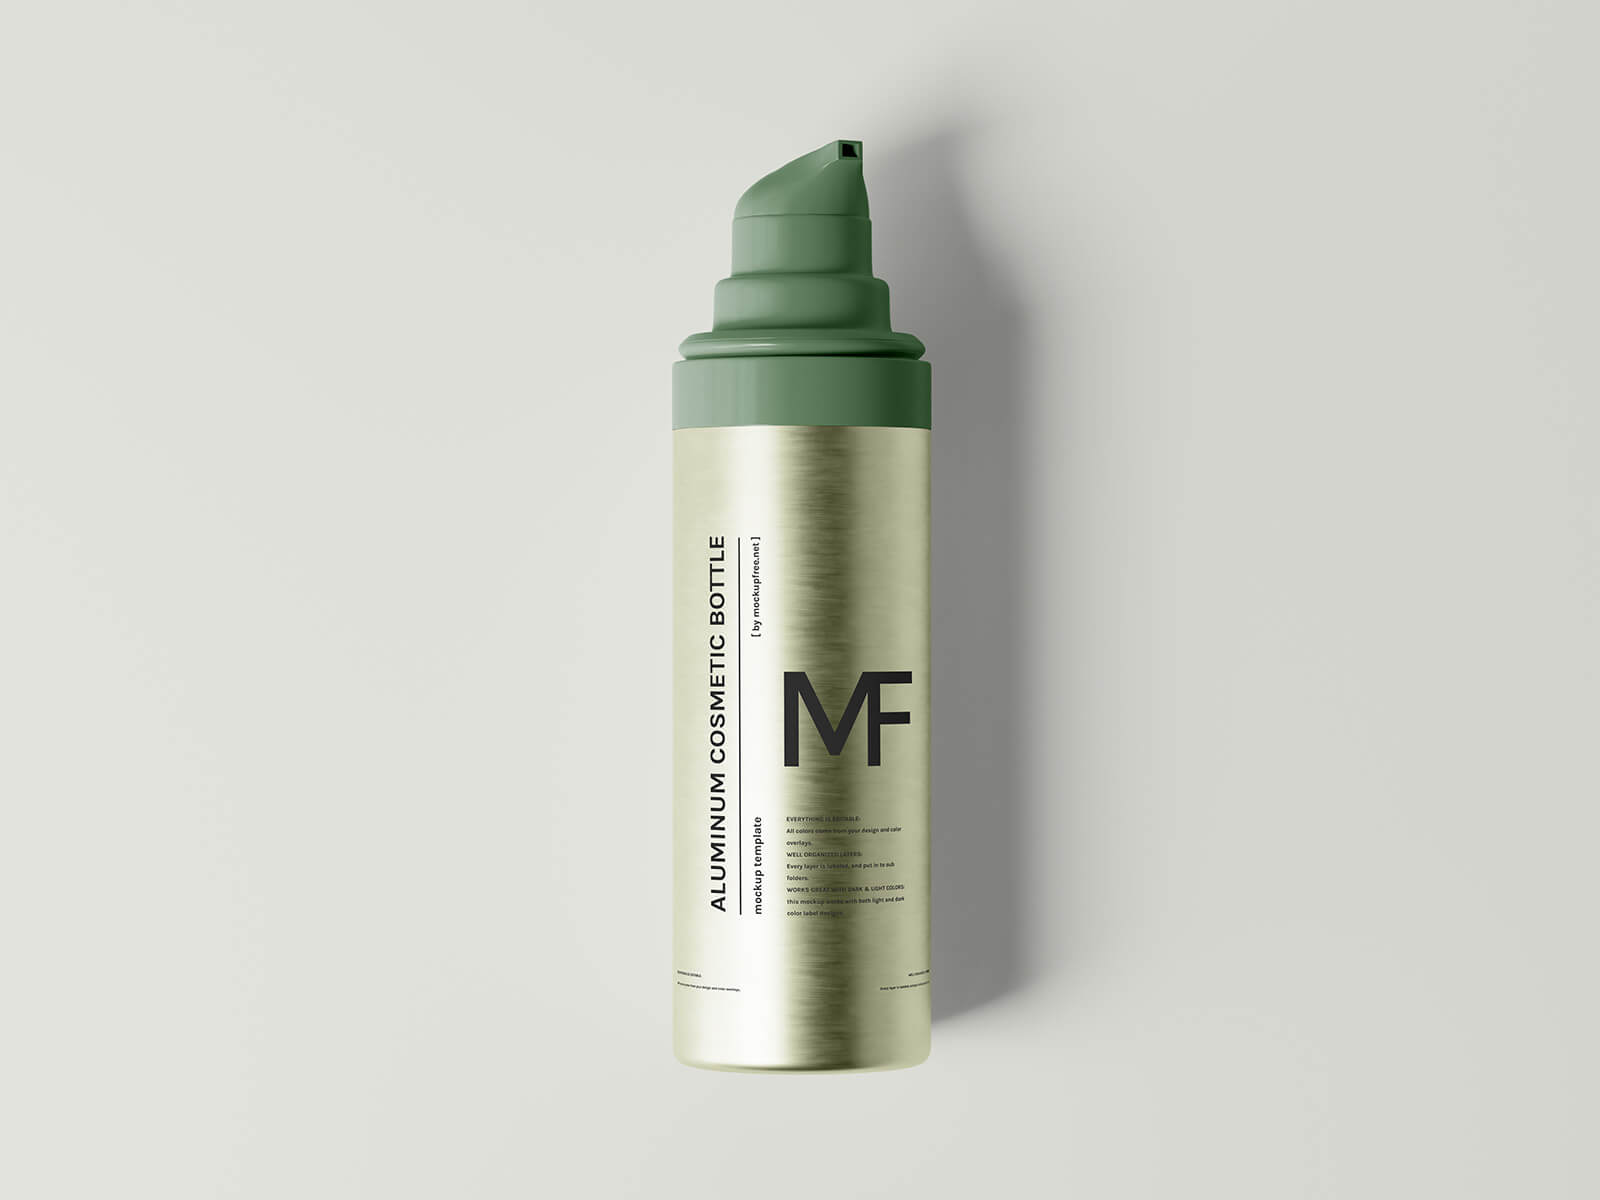 8 Free Airless Pump Bottle Mockup PSD Set For Cosmetic Products